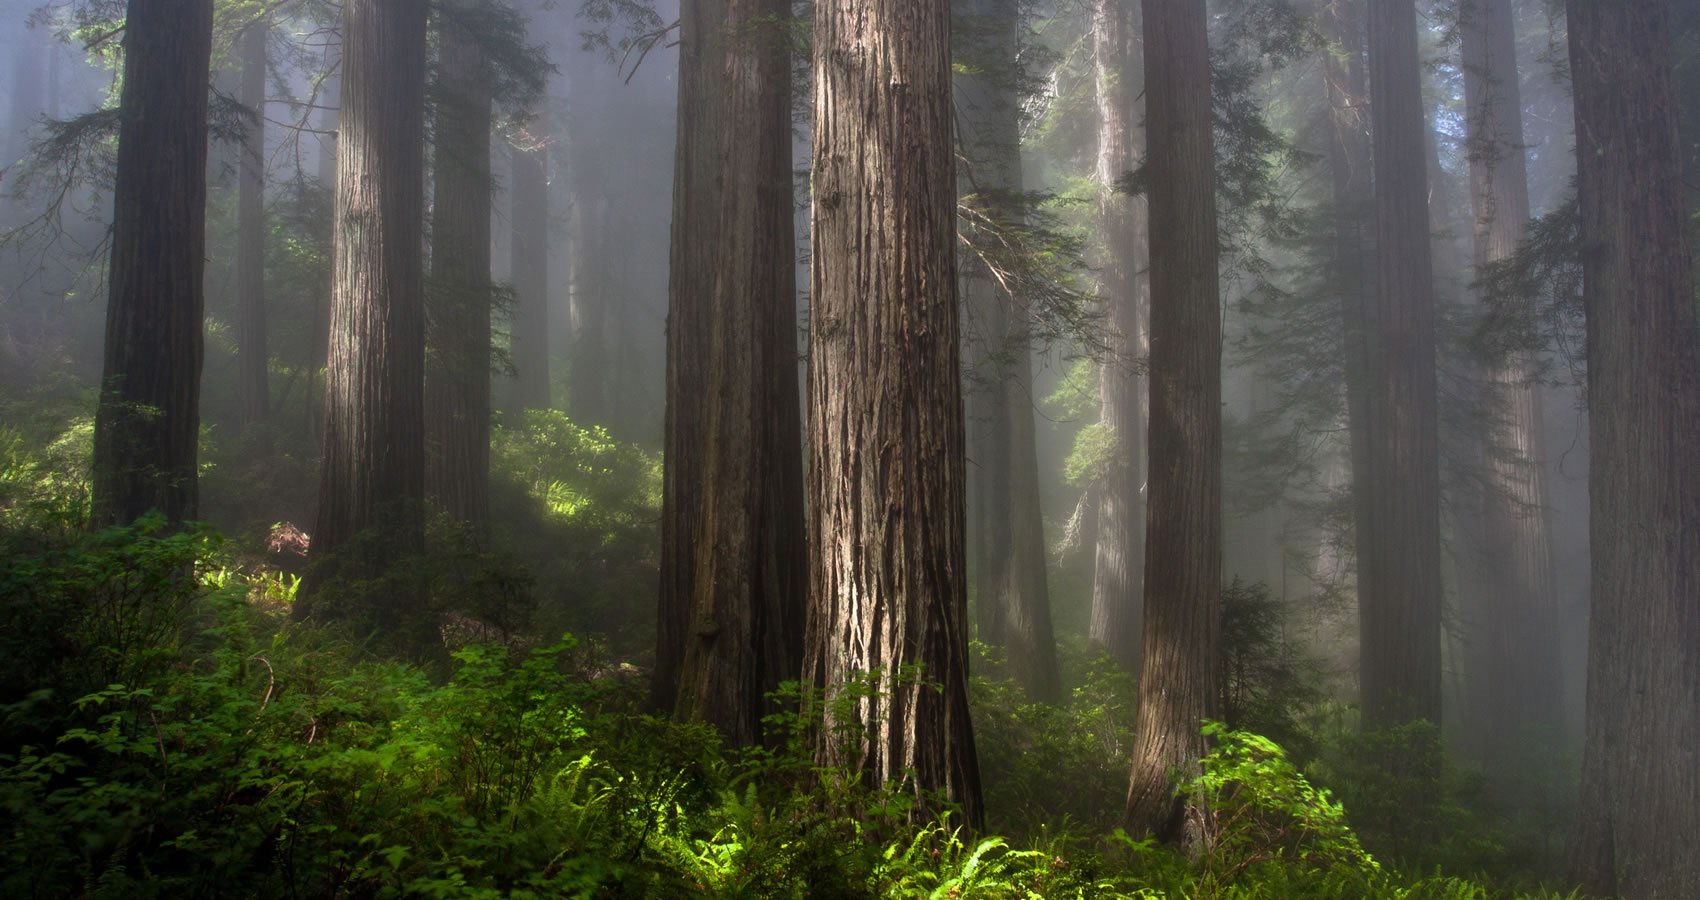 About Redwoods Save the Redwoods League